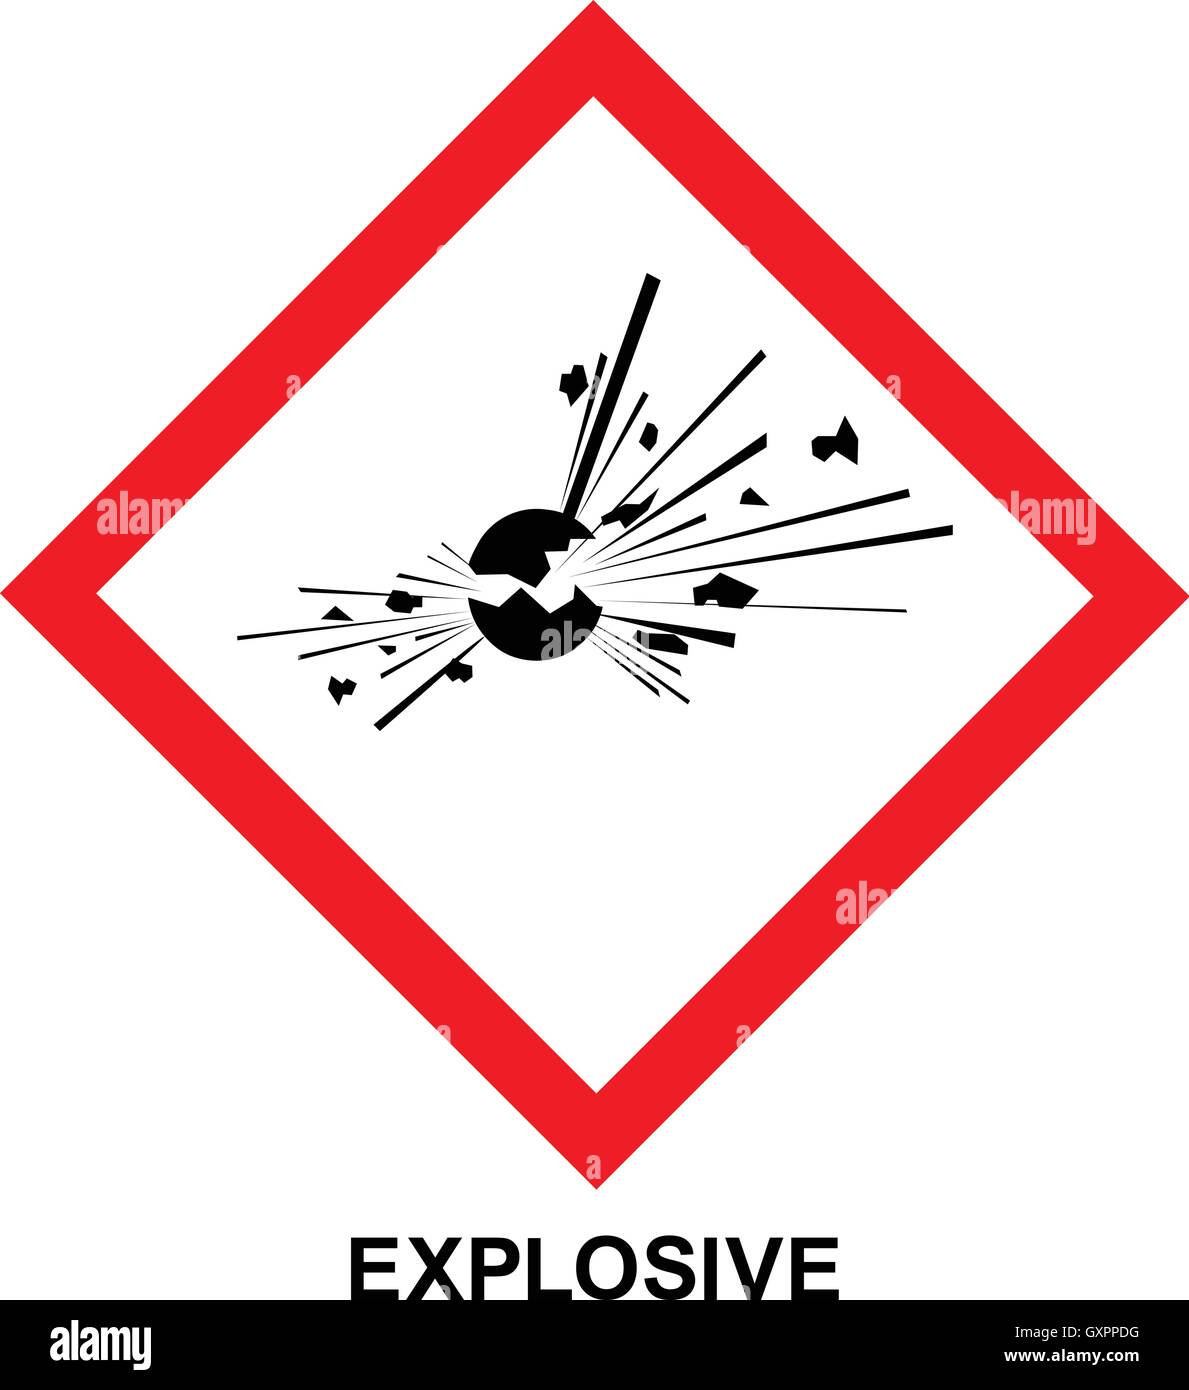 Explosive Sign In Black And White